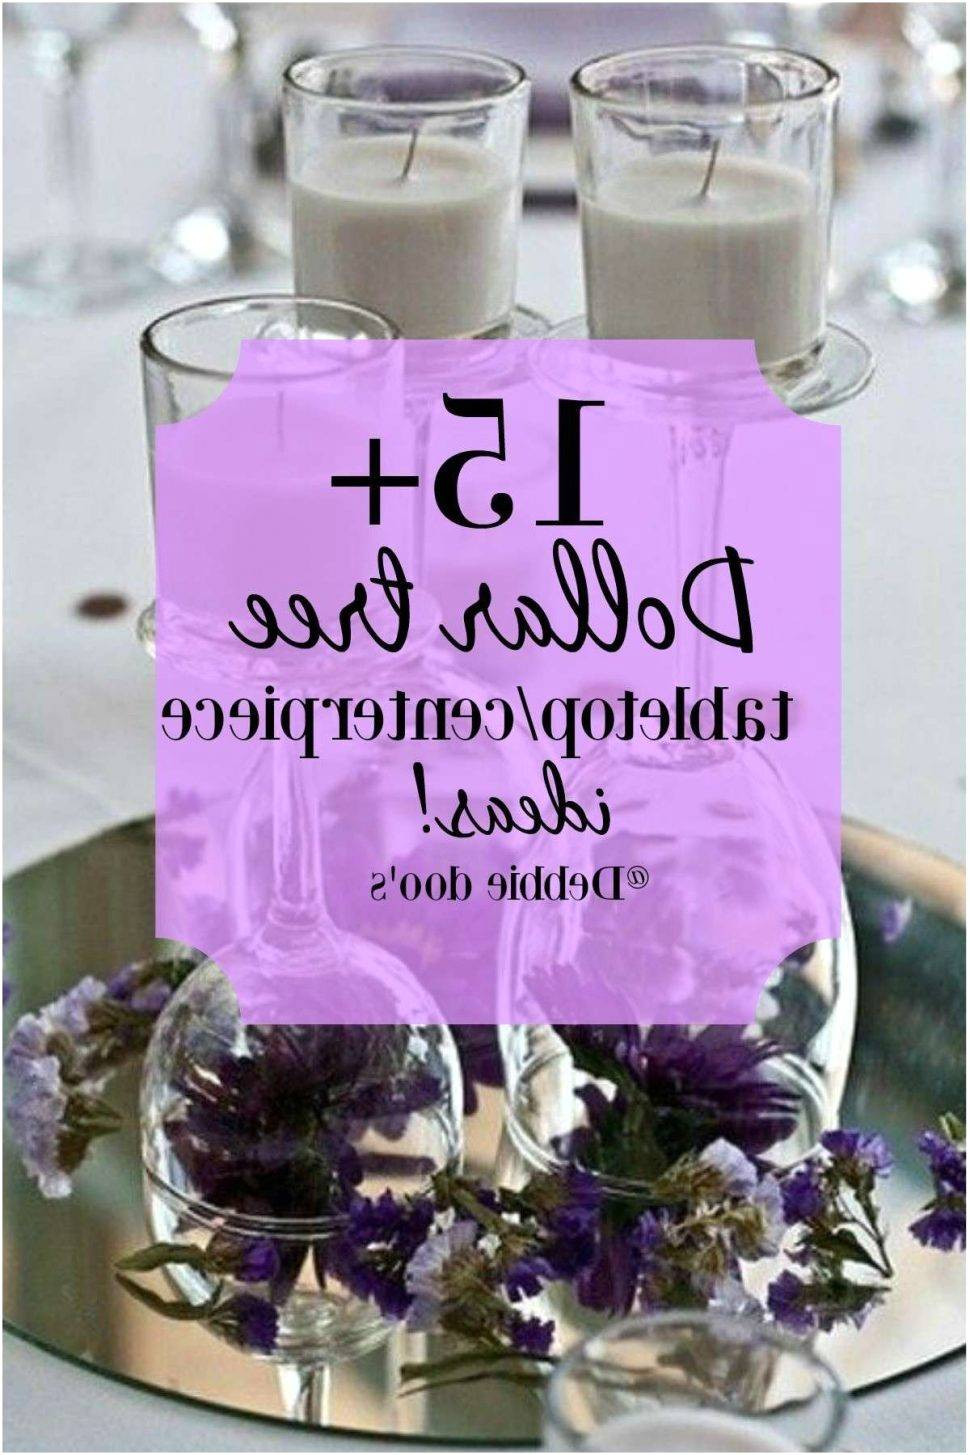 Dollar Store Vases and Candlesticks Of Dollar Store Wedding Ideas Elegant Tree Sign In for Wedding Intended for Dollar Store Wedding Ideas Elegant Tree Sign In for Wedding Wonderful Dollar Tree Wedding Decorations